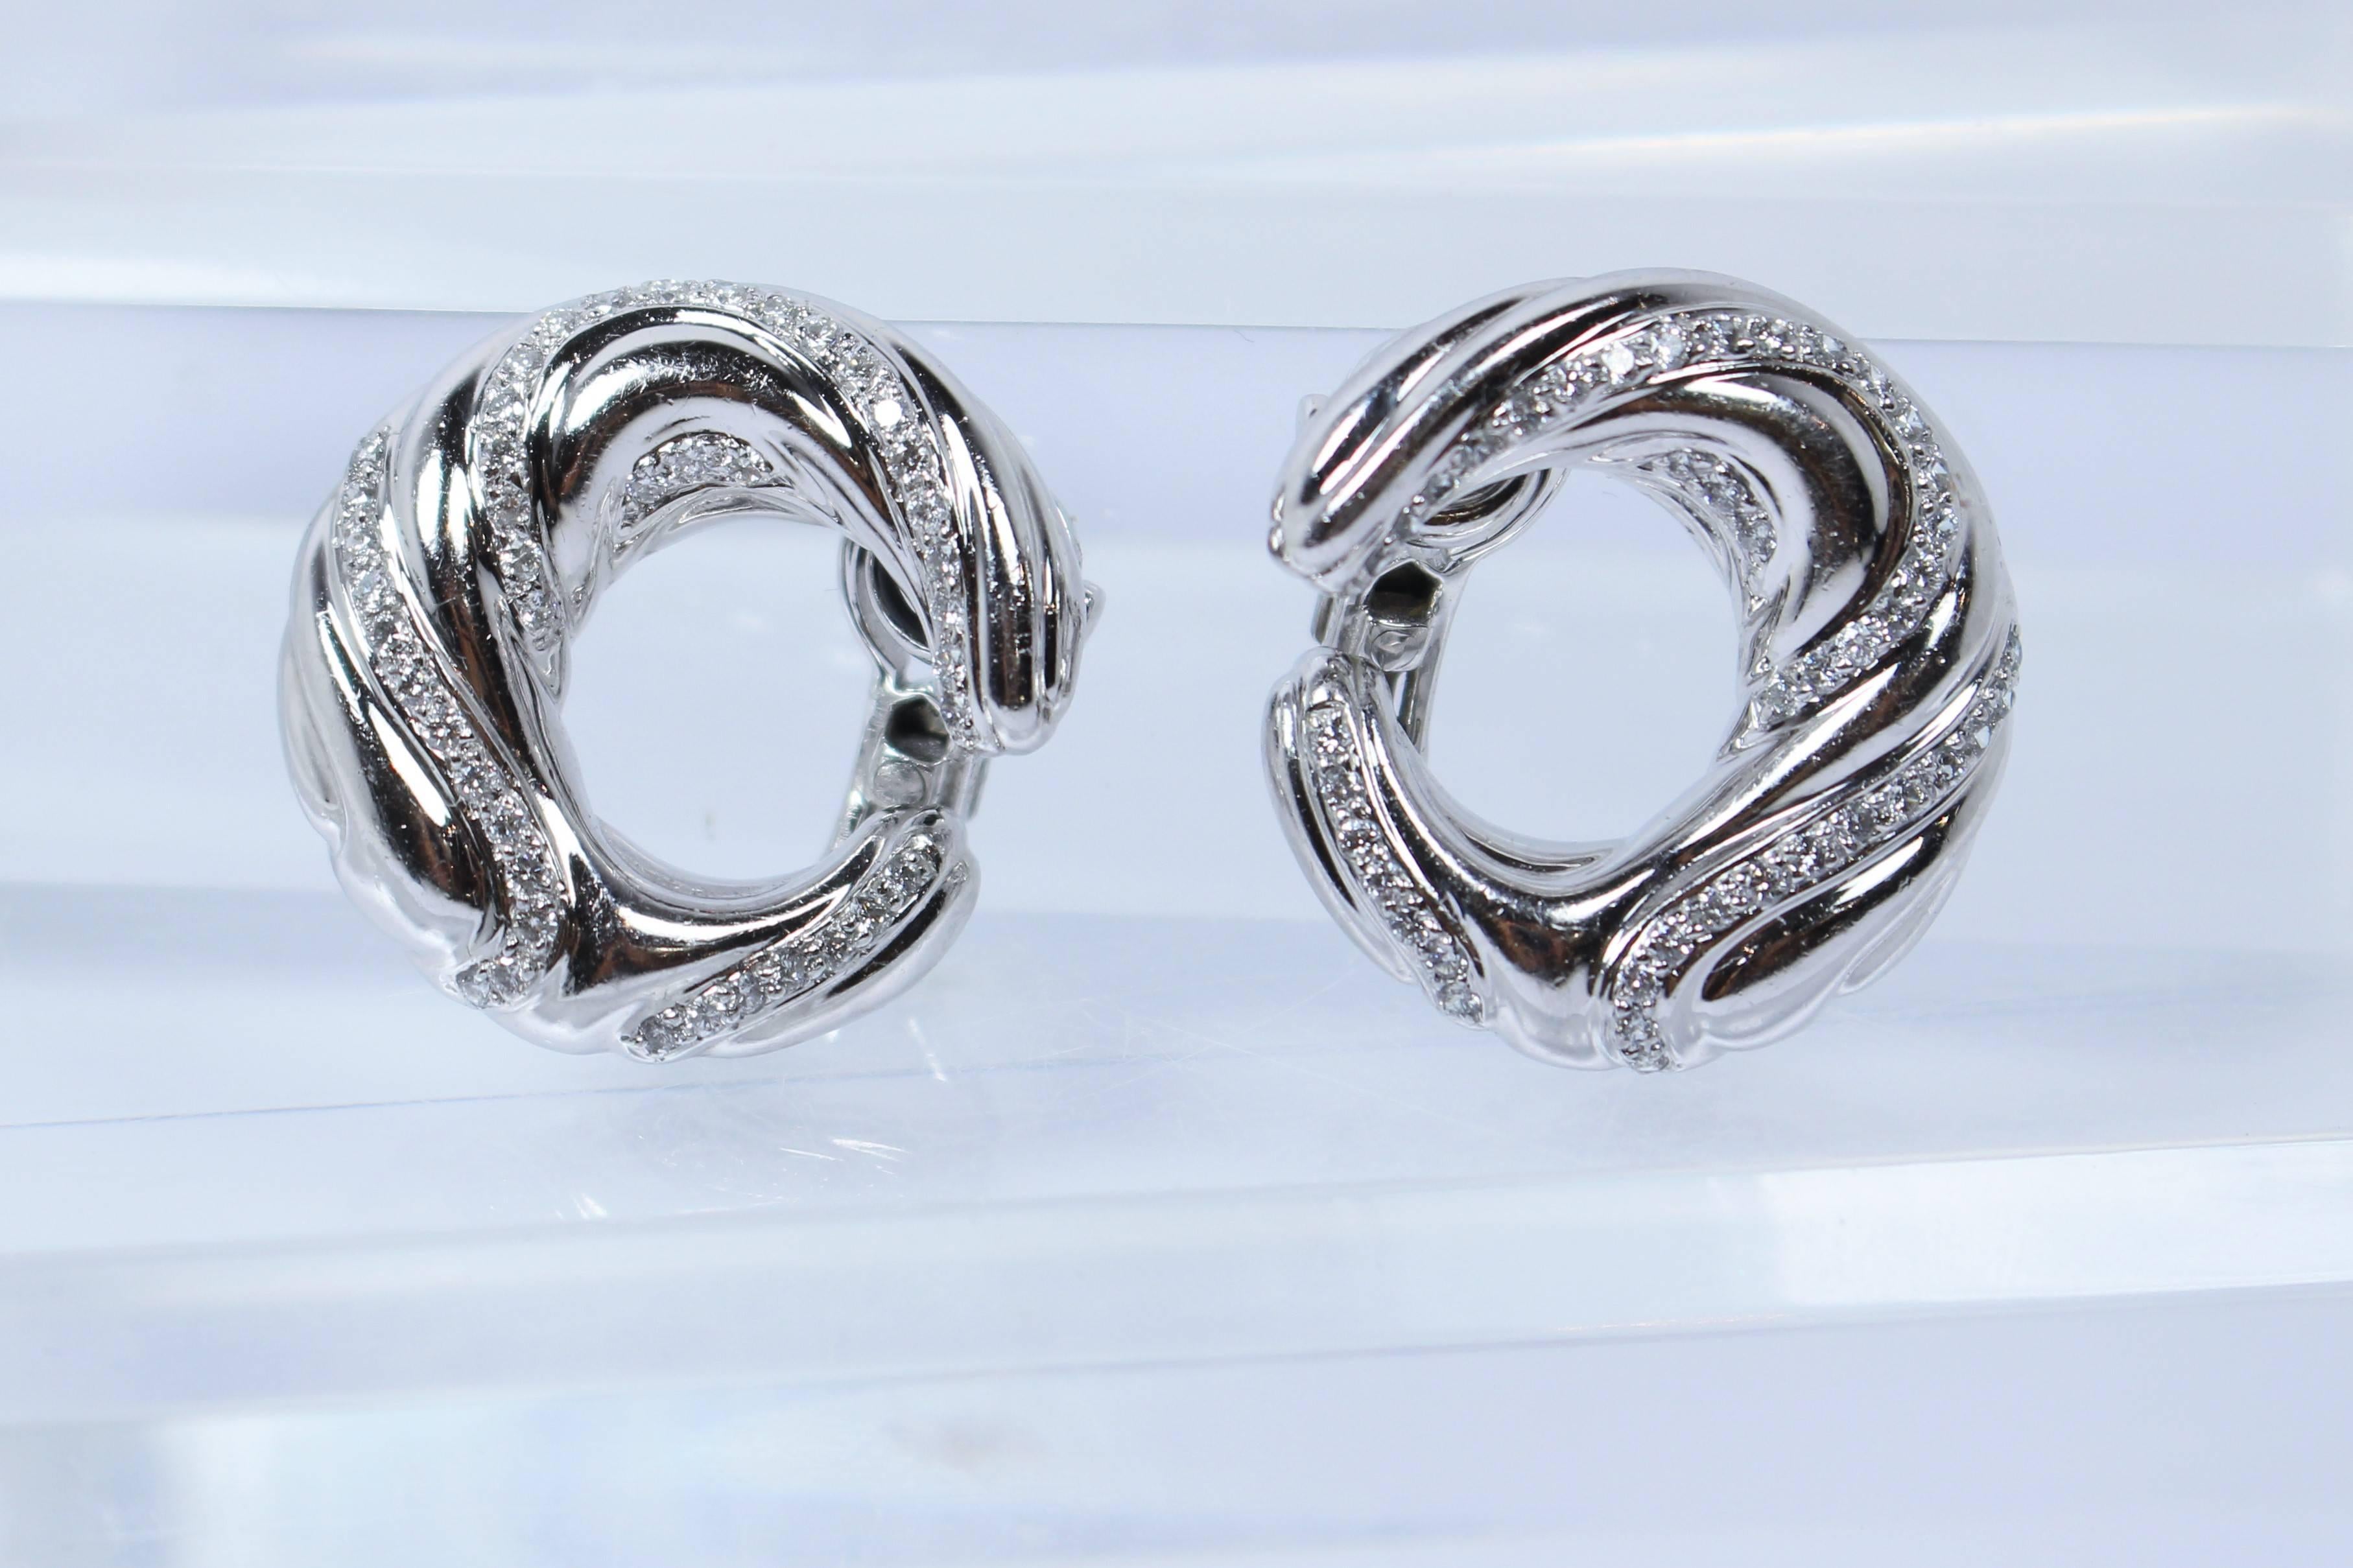 These earrings are composed of platinum and feature pave diamonds throughout the design. Features a tension clip backing/clasp. In excellent vintage condition.

Specs: 
Platinum 
86 Diamonds (Approximately 1.30 CTS Total Weight)

Length: 1